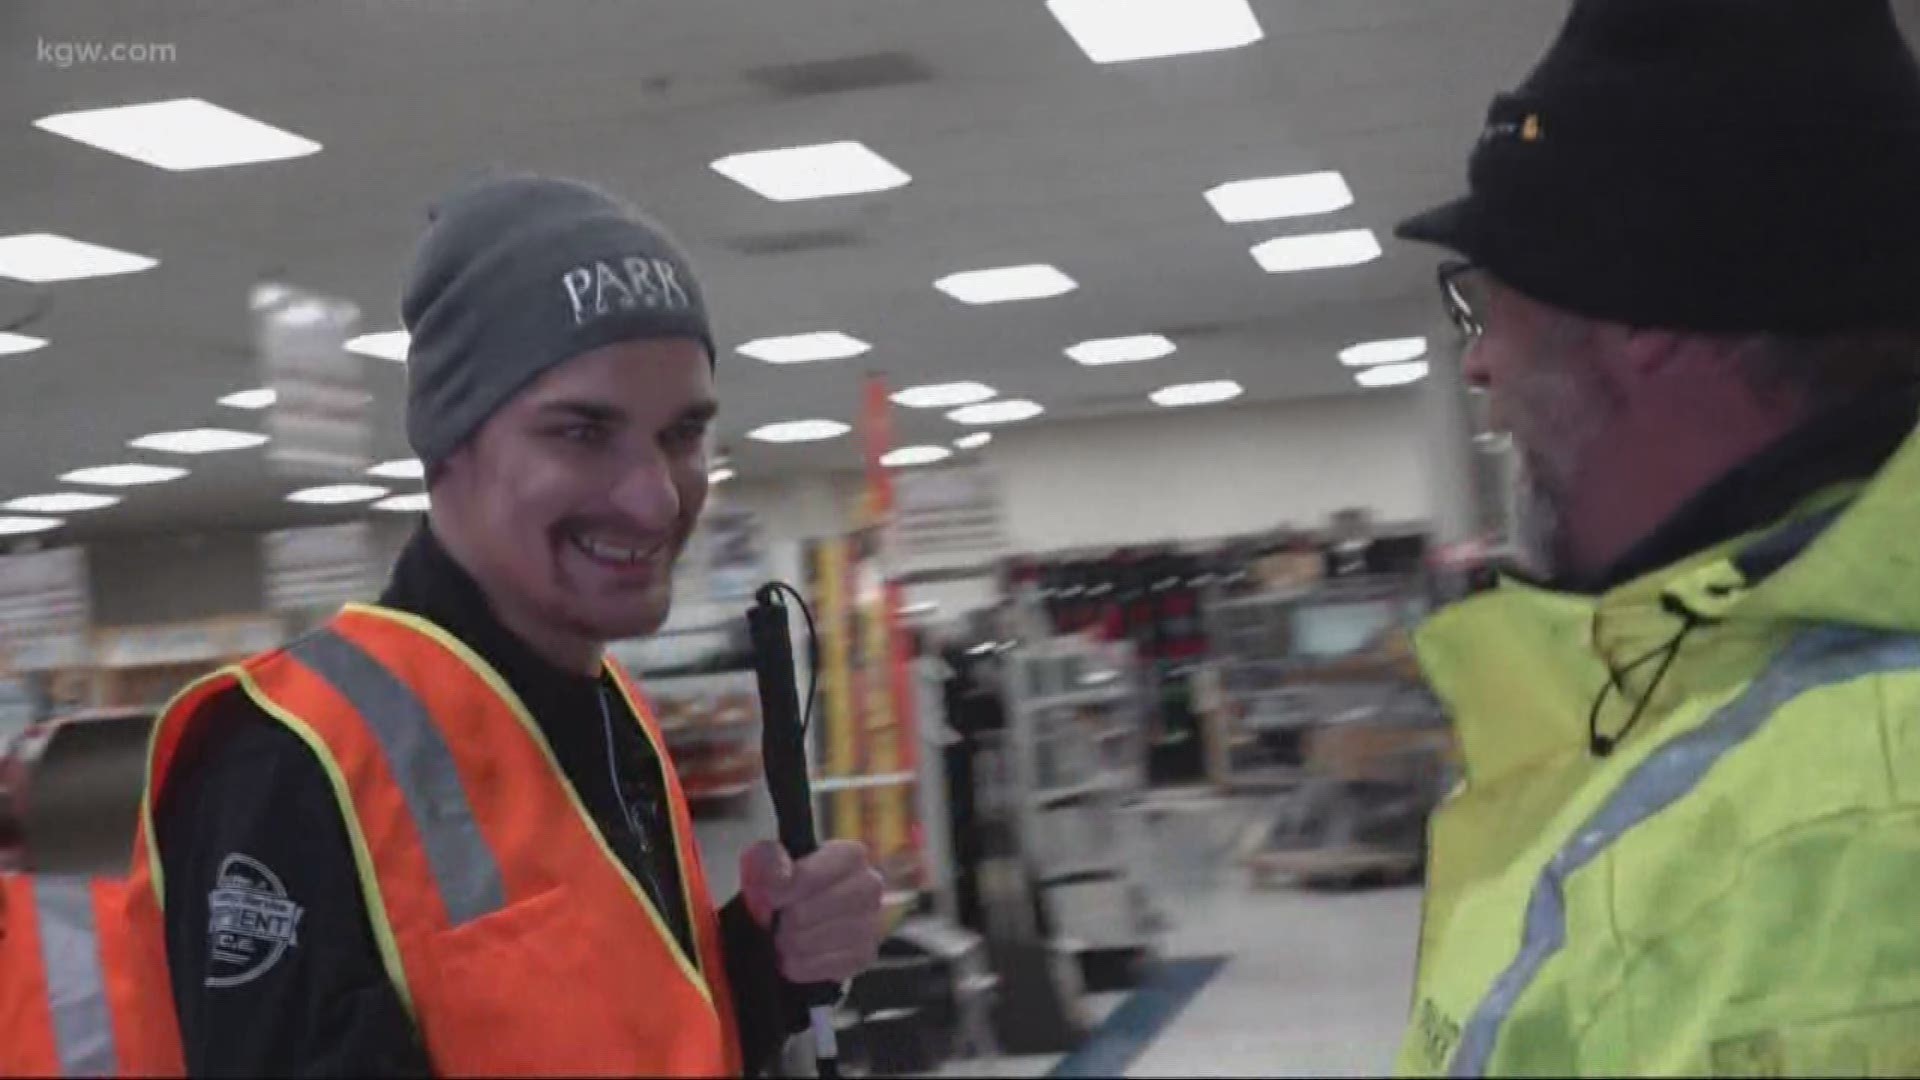 We profile a special award giving to a local worker. How he found fulfillment and friends on the job.